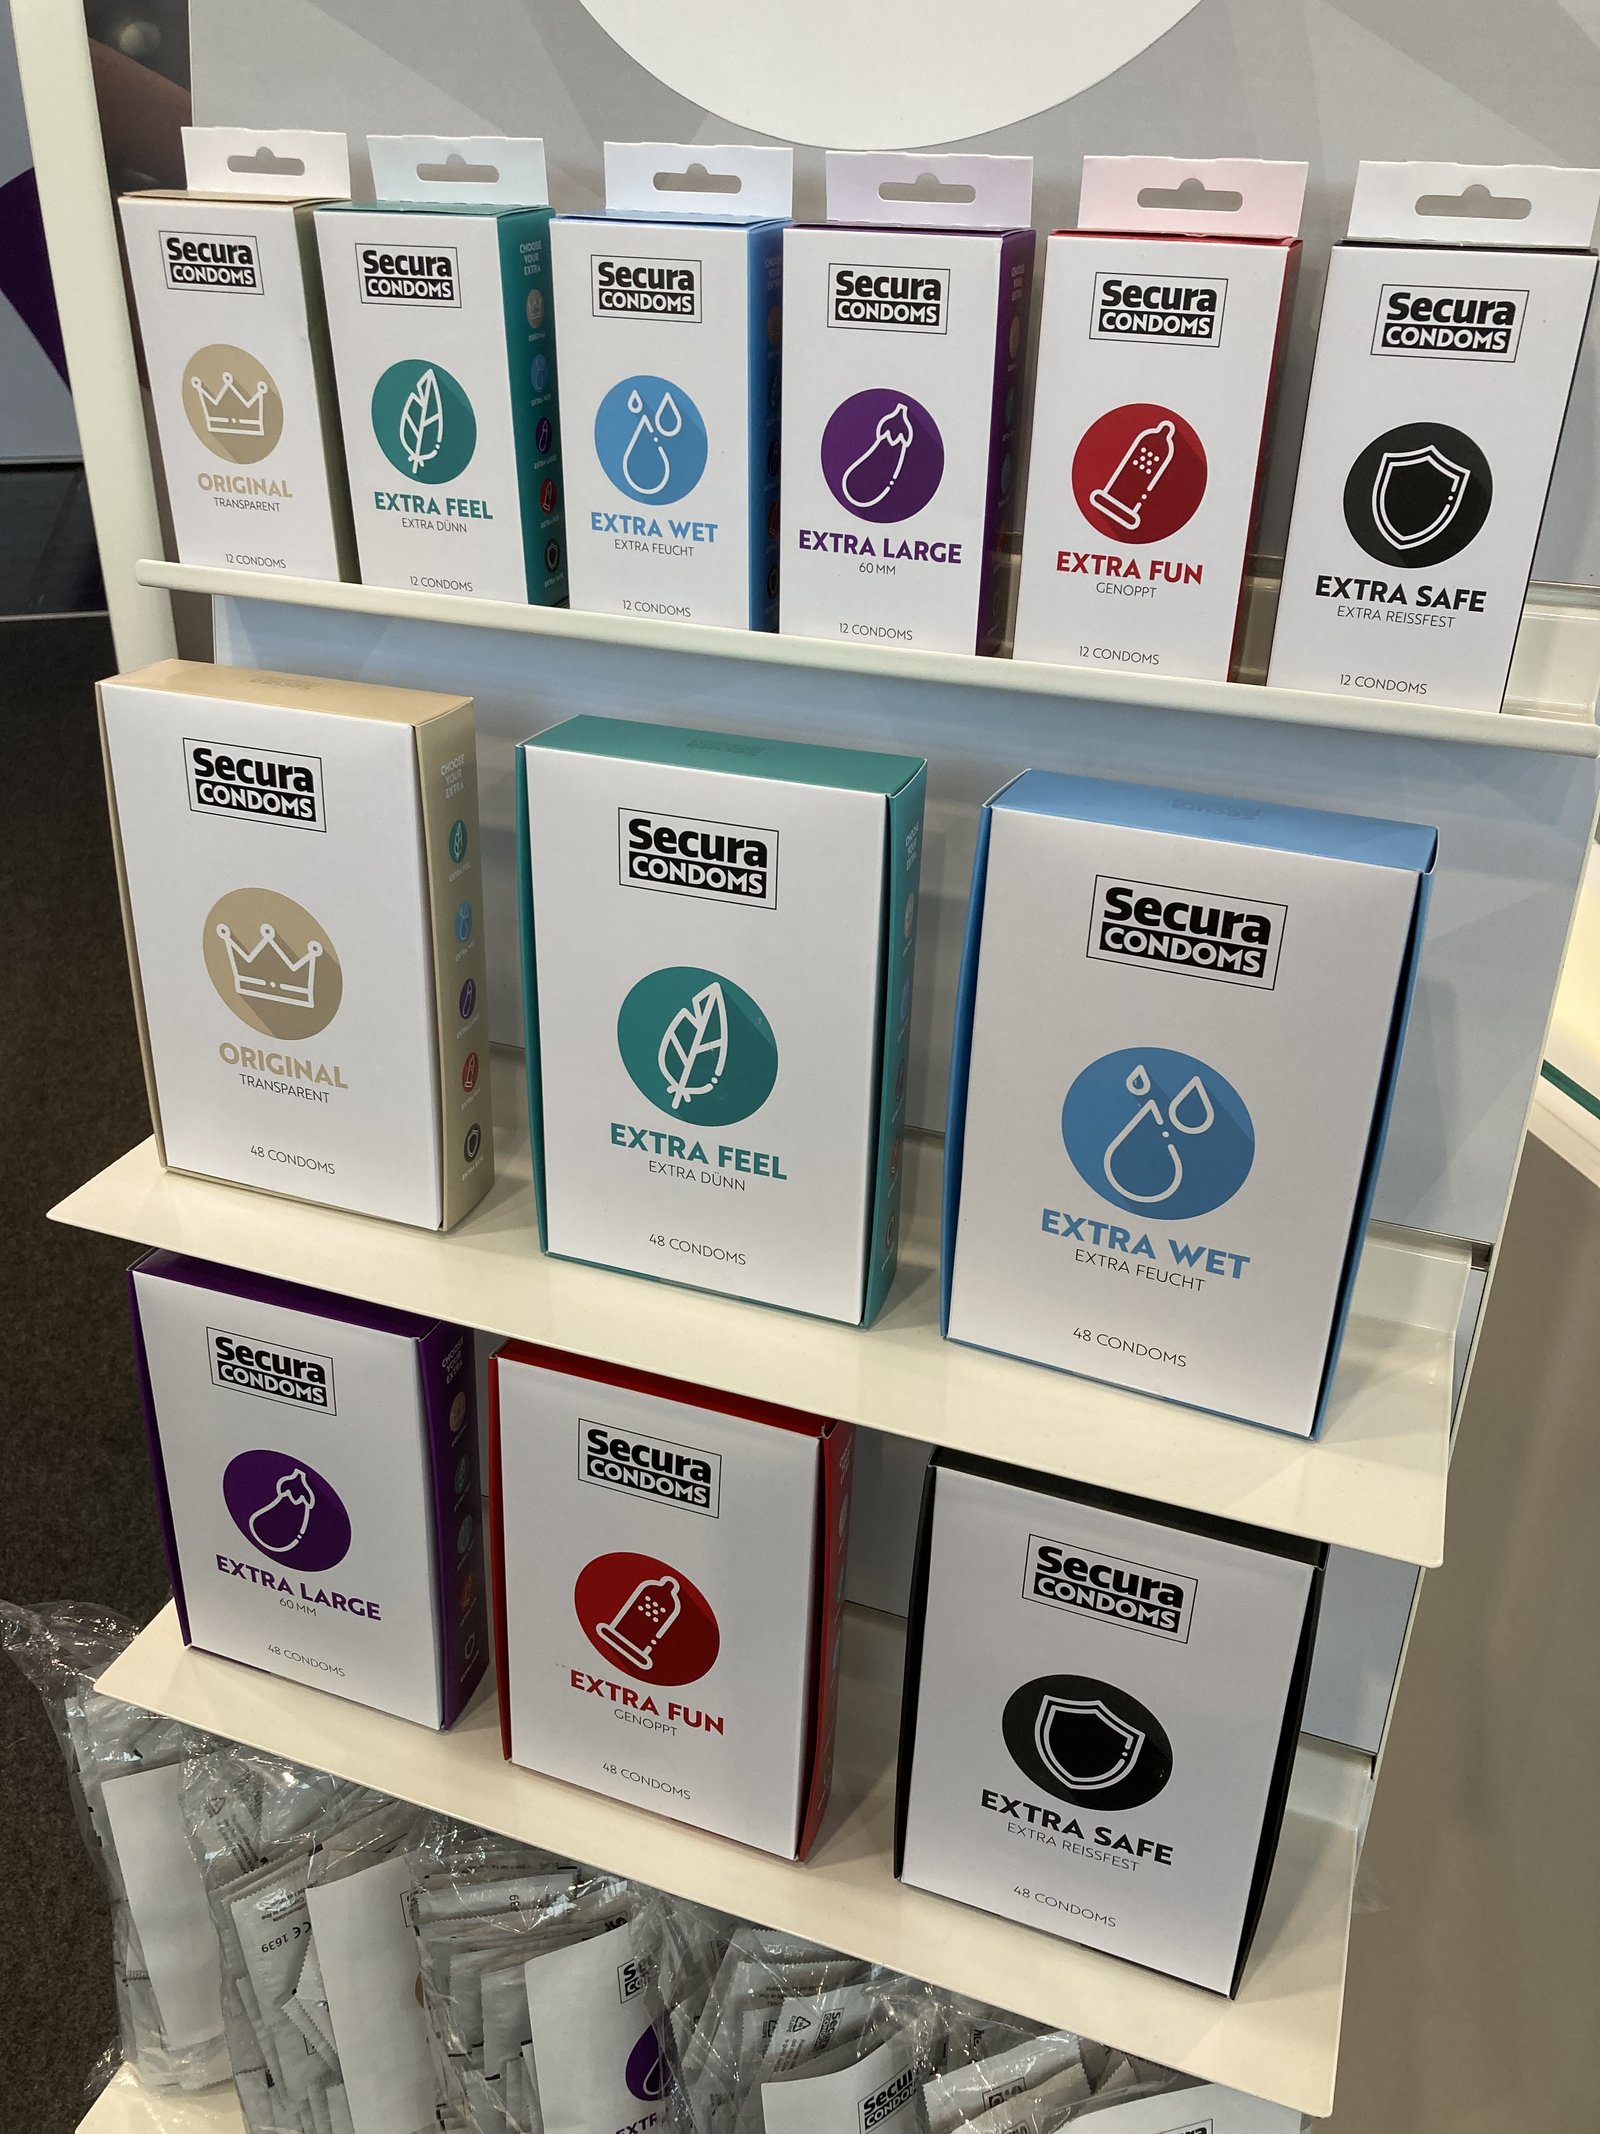 The new Secura condoms at the Erofame in Hanover